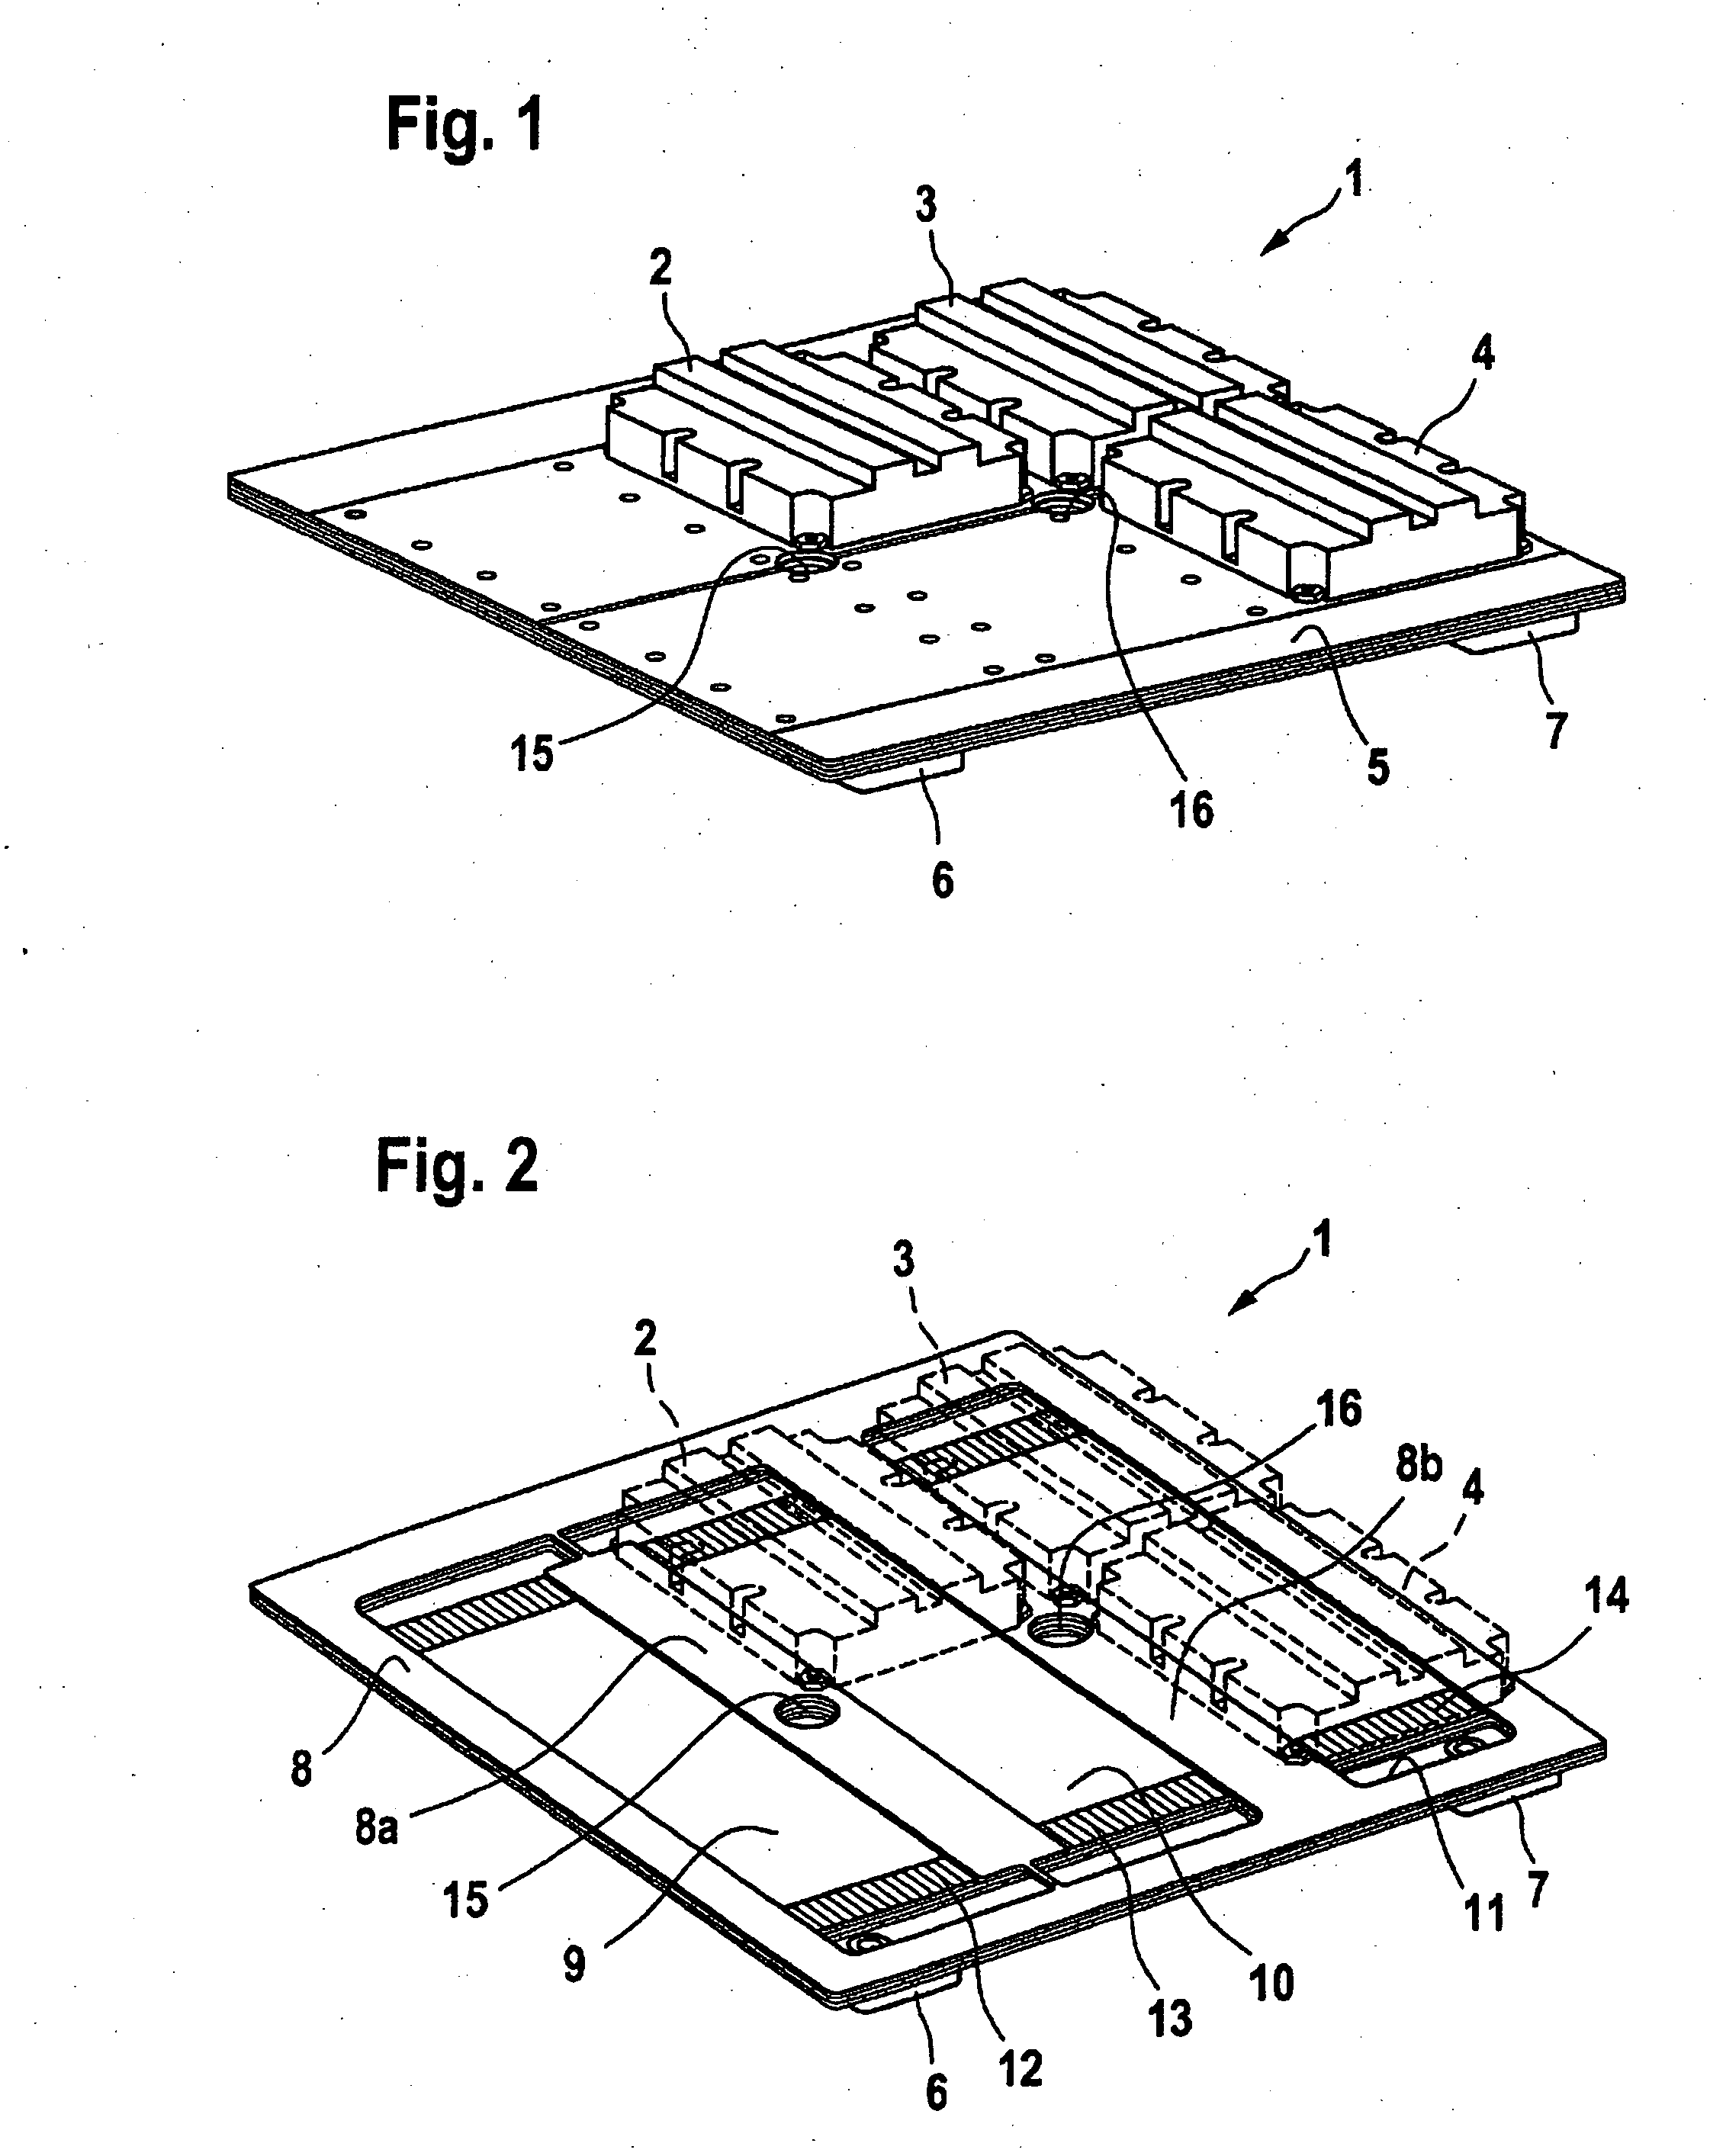 Apparatus for cooling electronic components